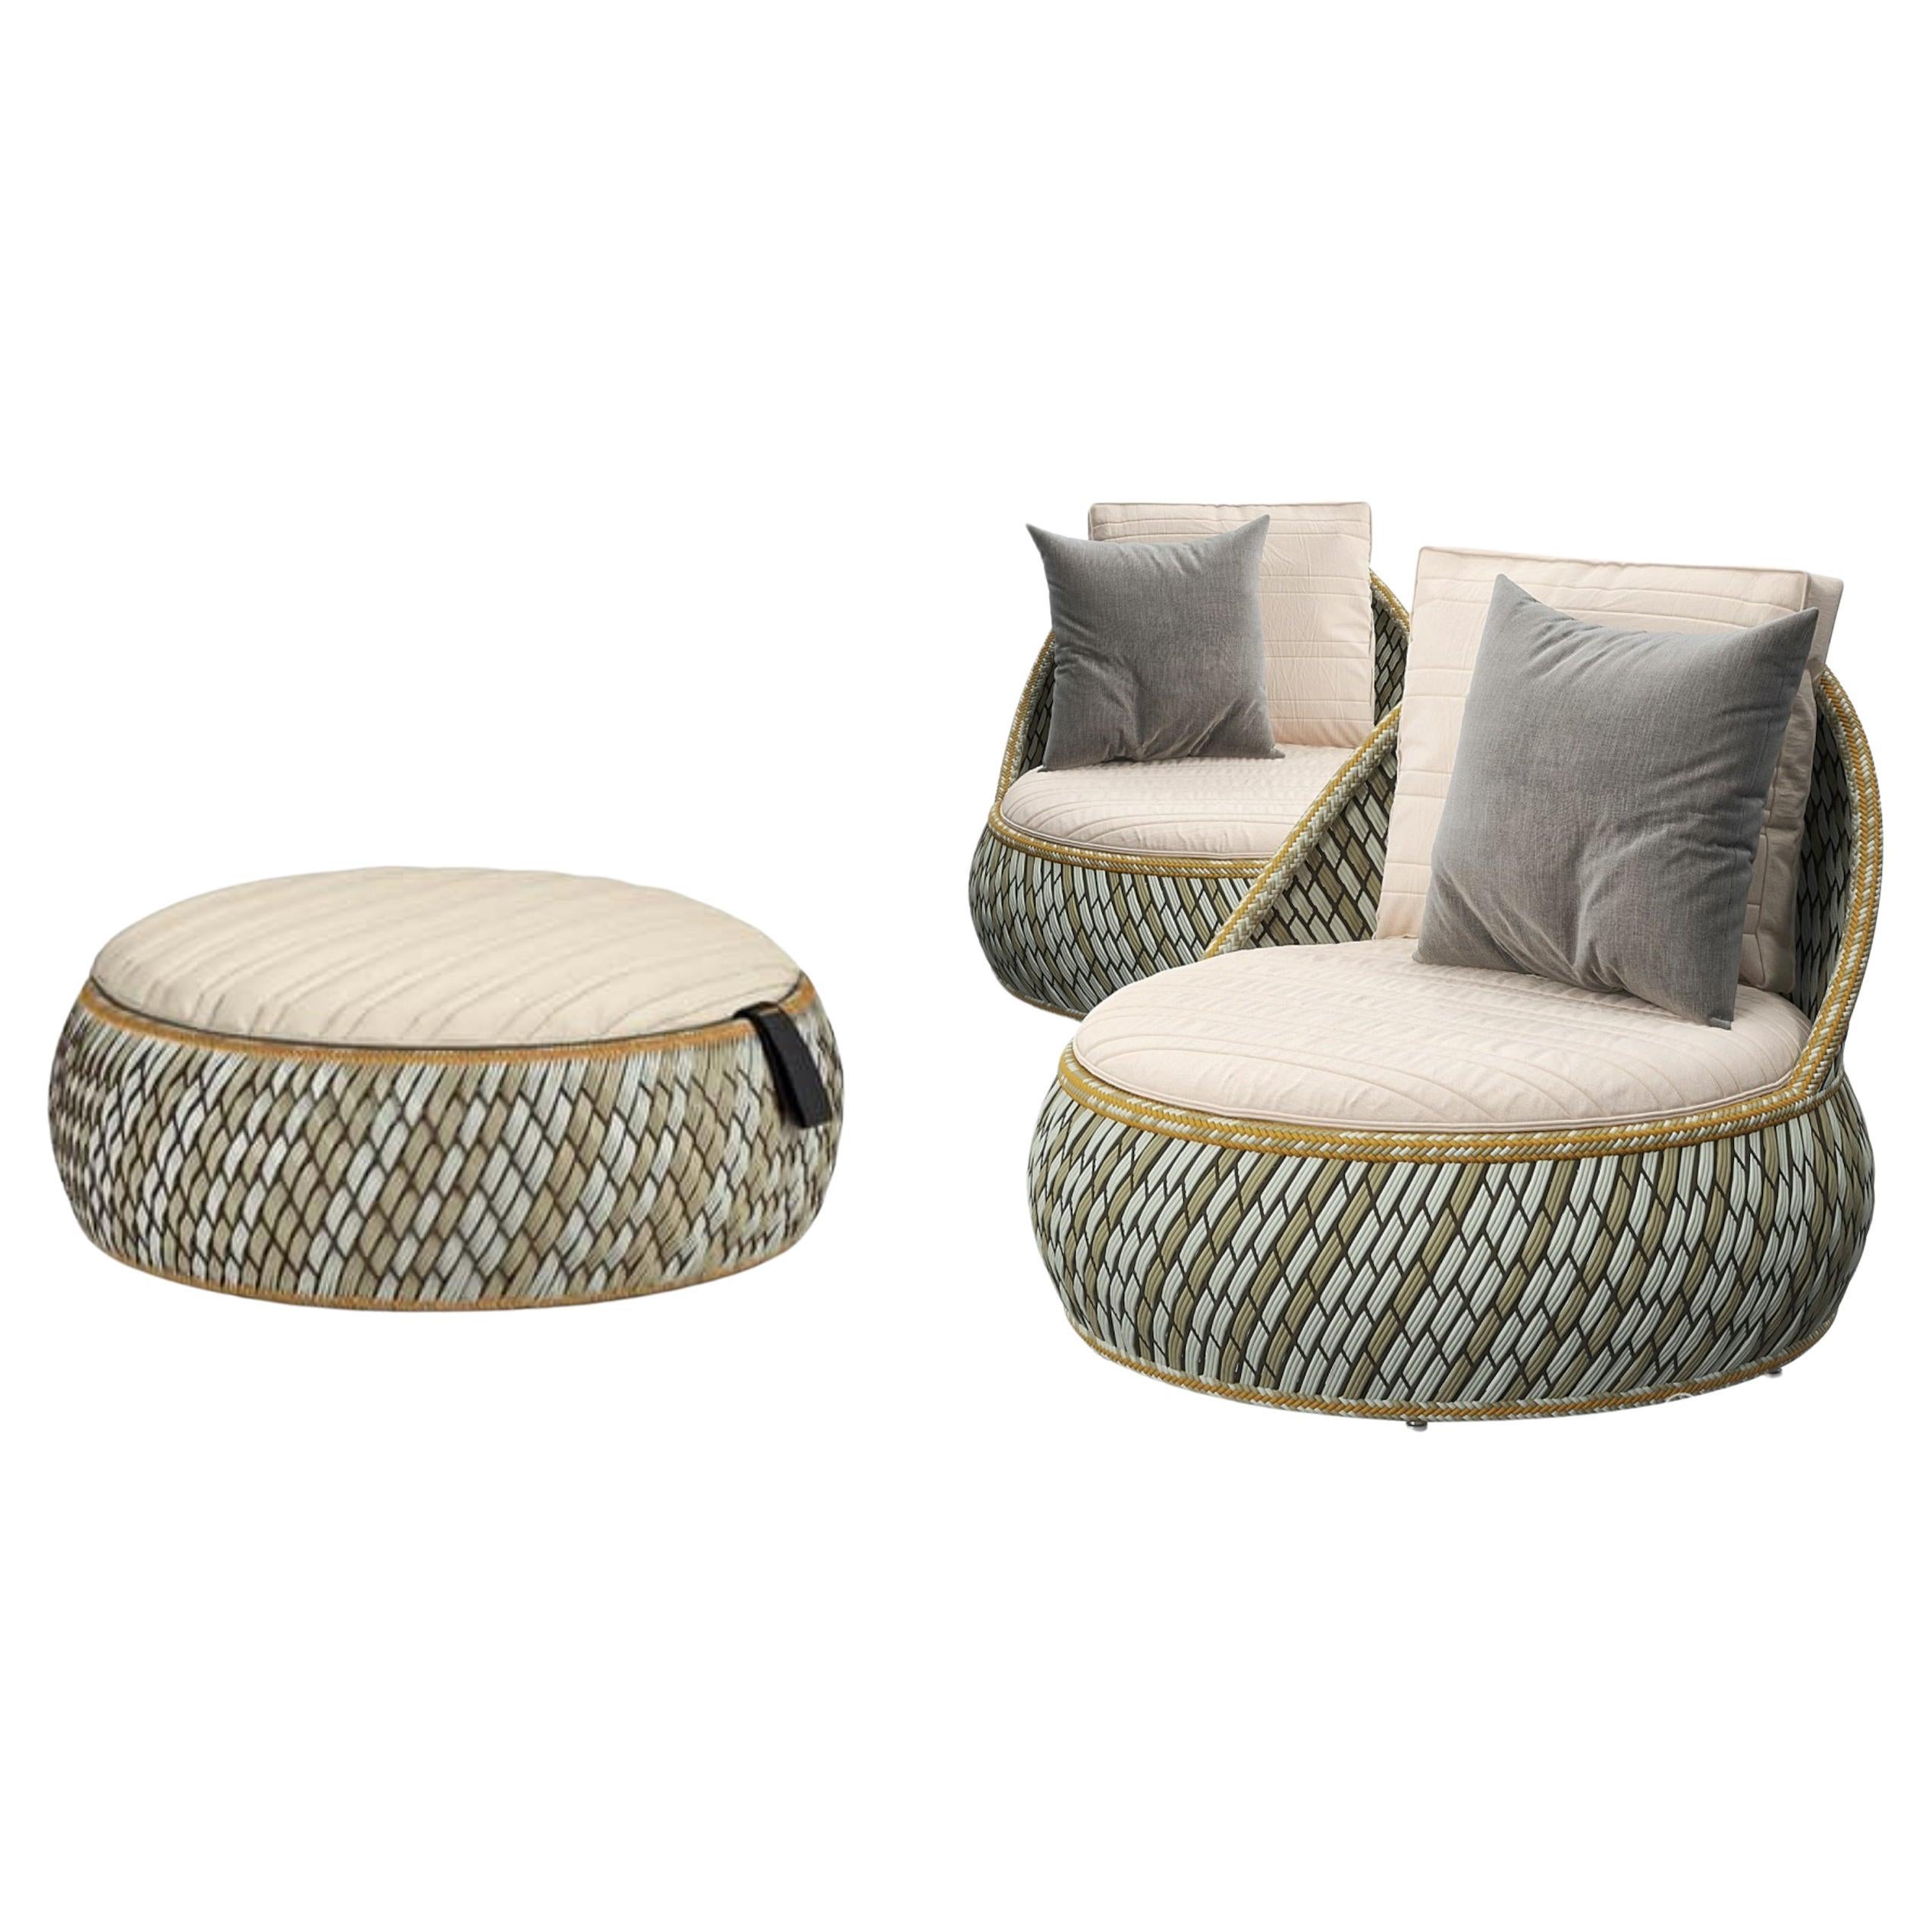 21st Century German Dala Lounge Chairs and a Footstool by Dedon For Sale